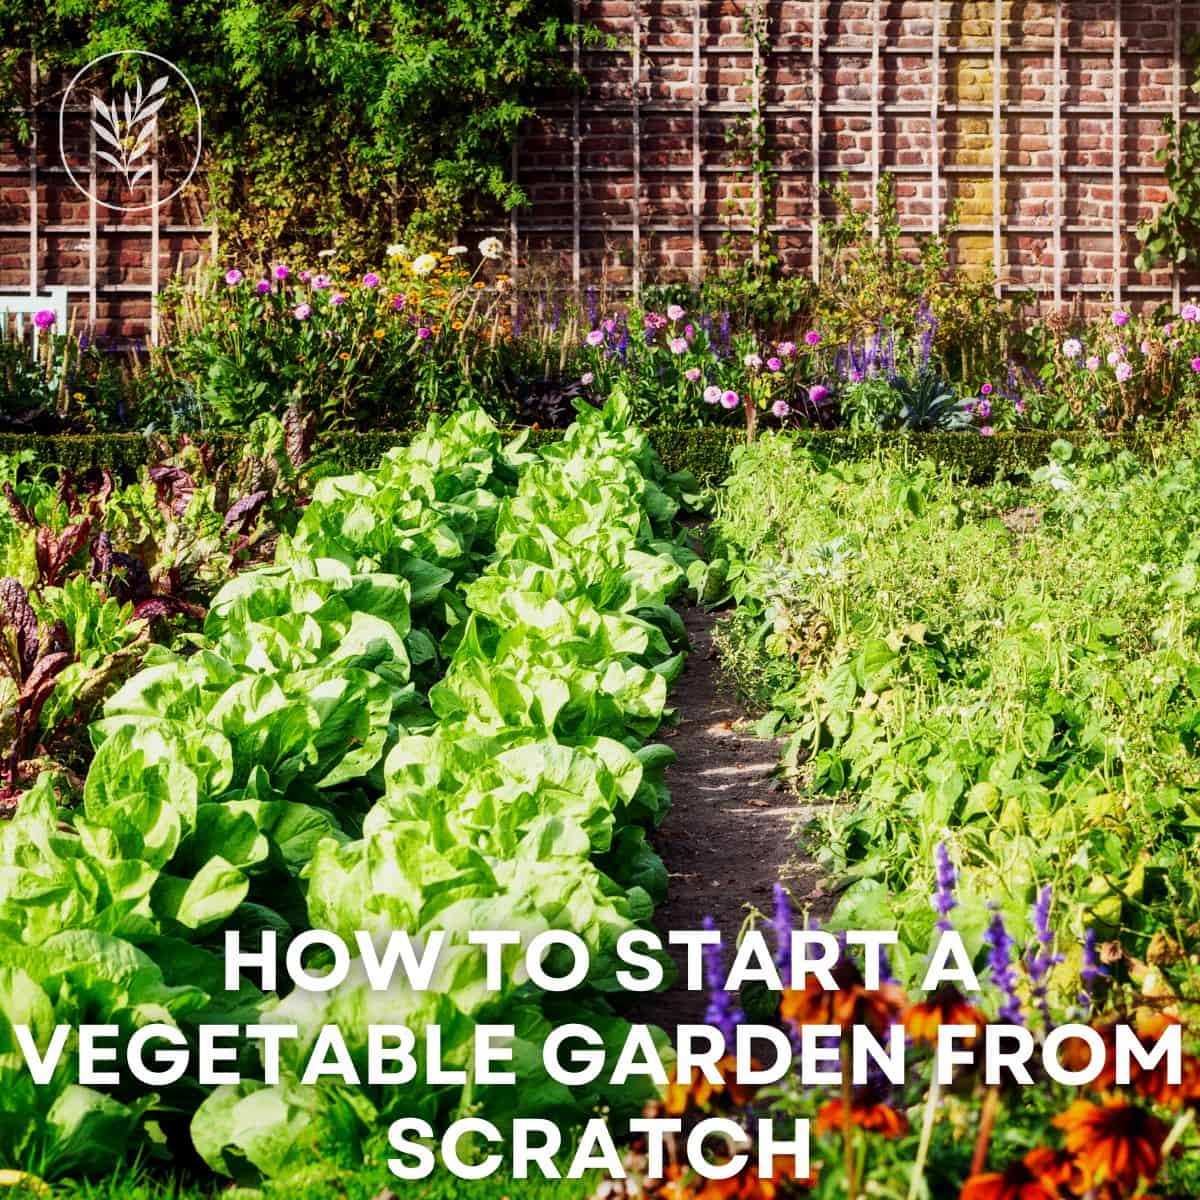 How to start a vegetable garden from scratch via @home4theharvest